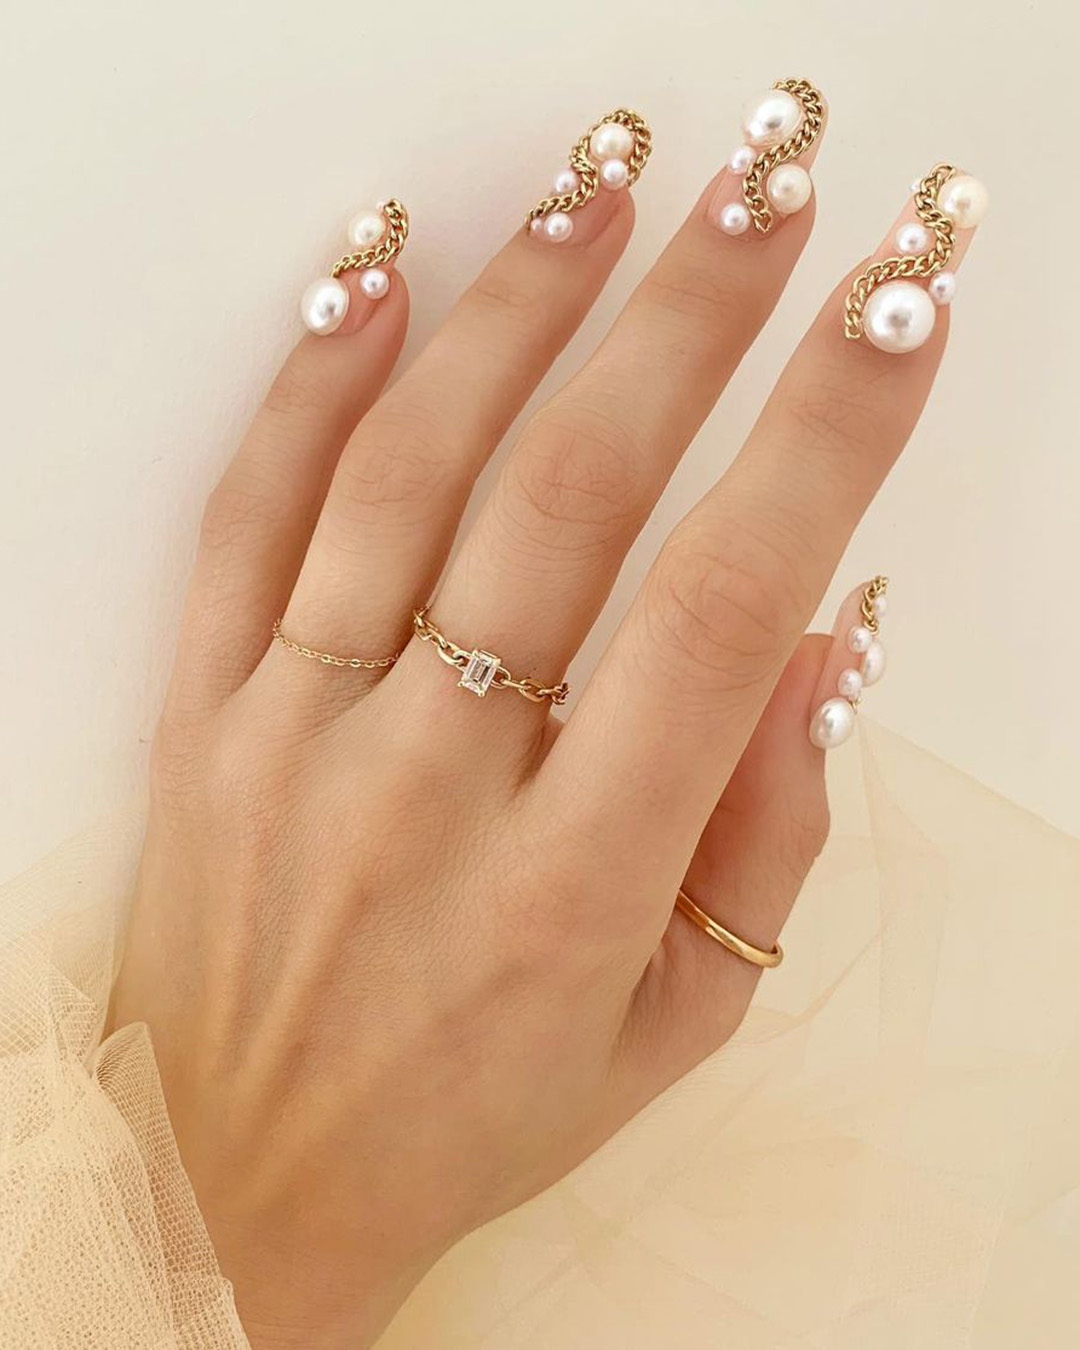 vintage wedding nails with pearls and gold chains betina_goldstein